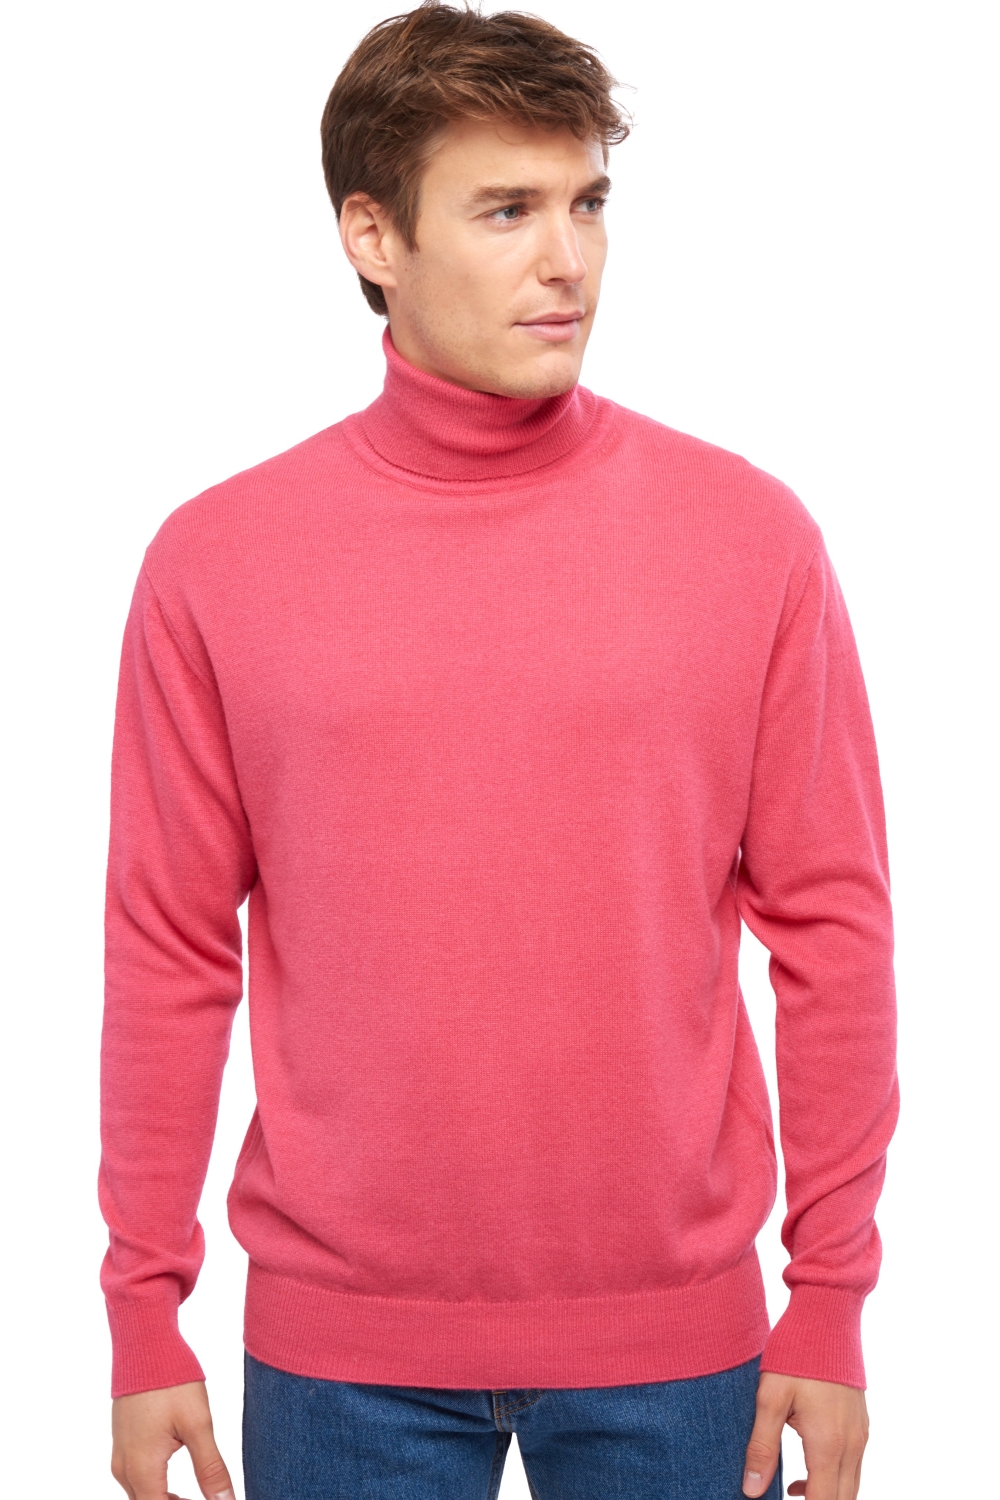 Cachemire pull homme col roule edgar rose shocking 4xl